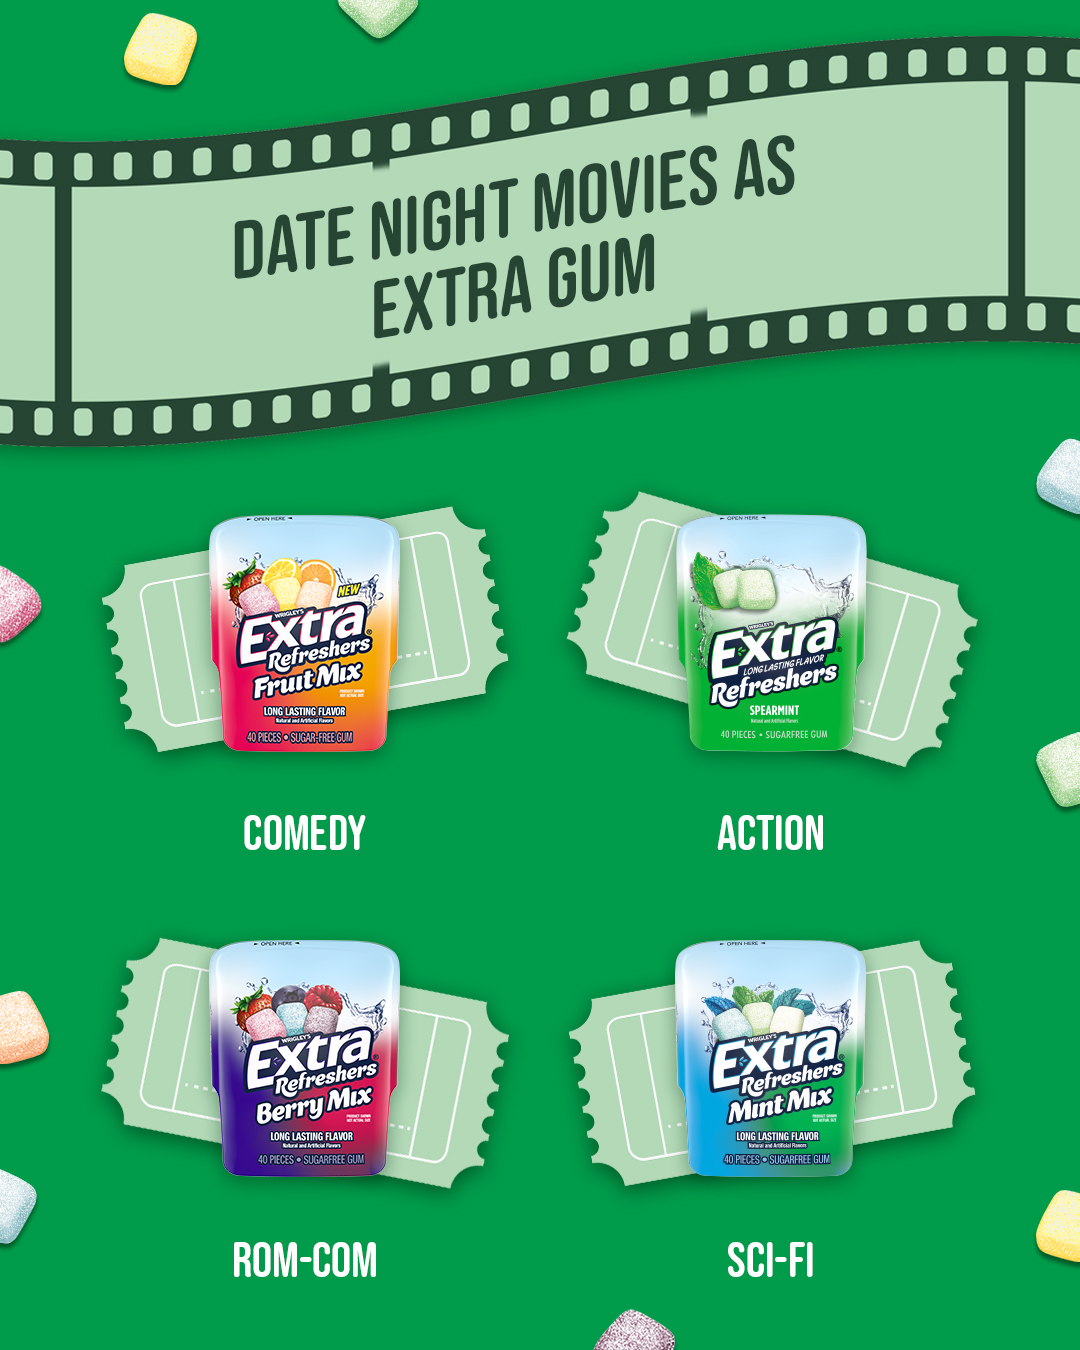 Woning Draaien Permanent EXTRA GUM on Twitter: "What flavor would you pair with your favorite movie  genre? https://t.co/WArvmc6FSQ" / Twitter